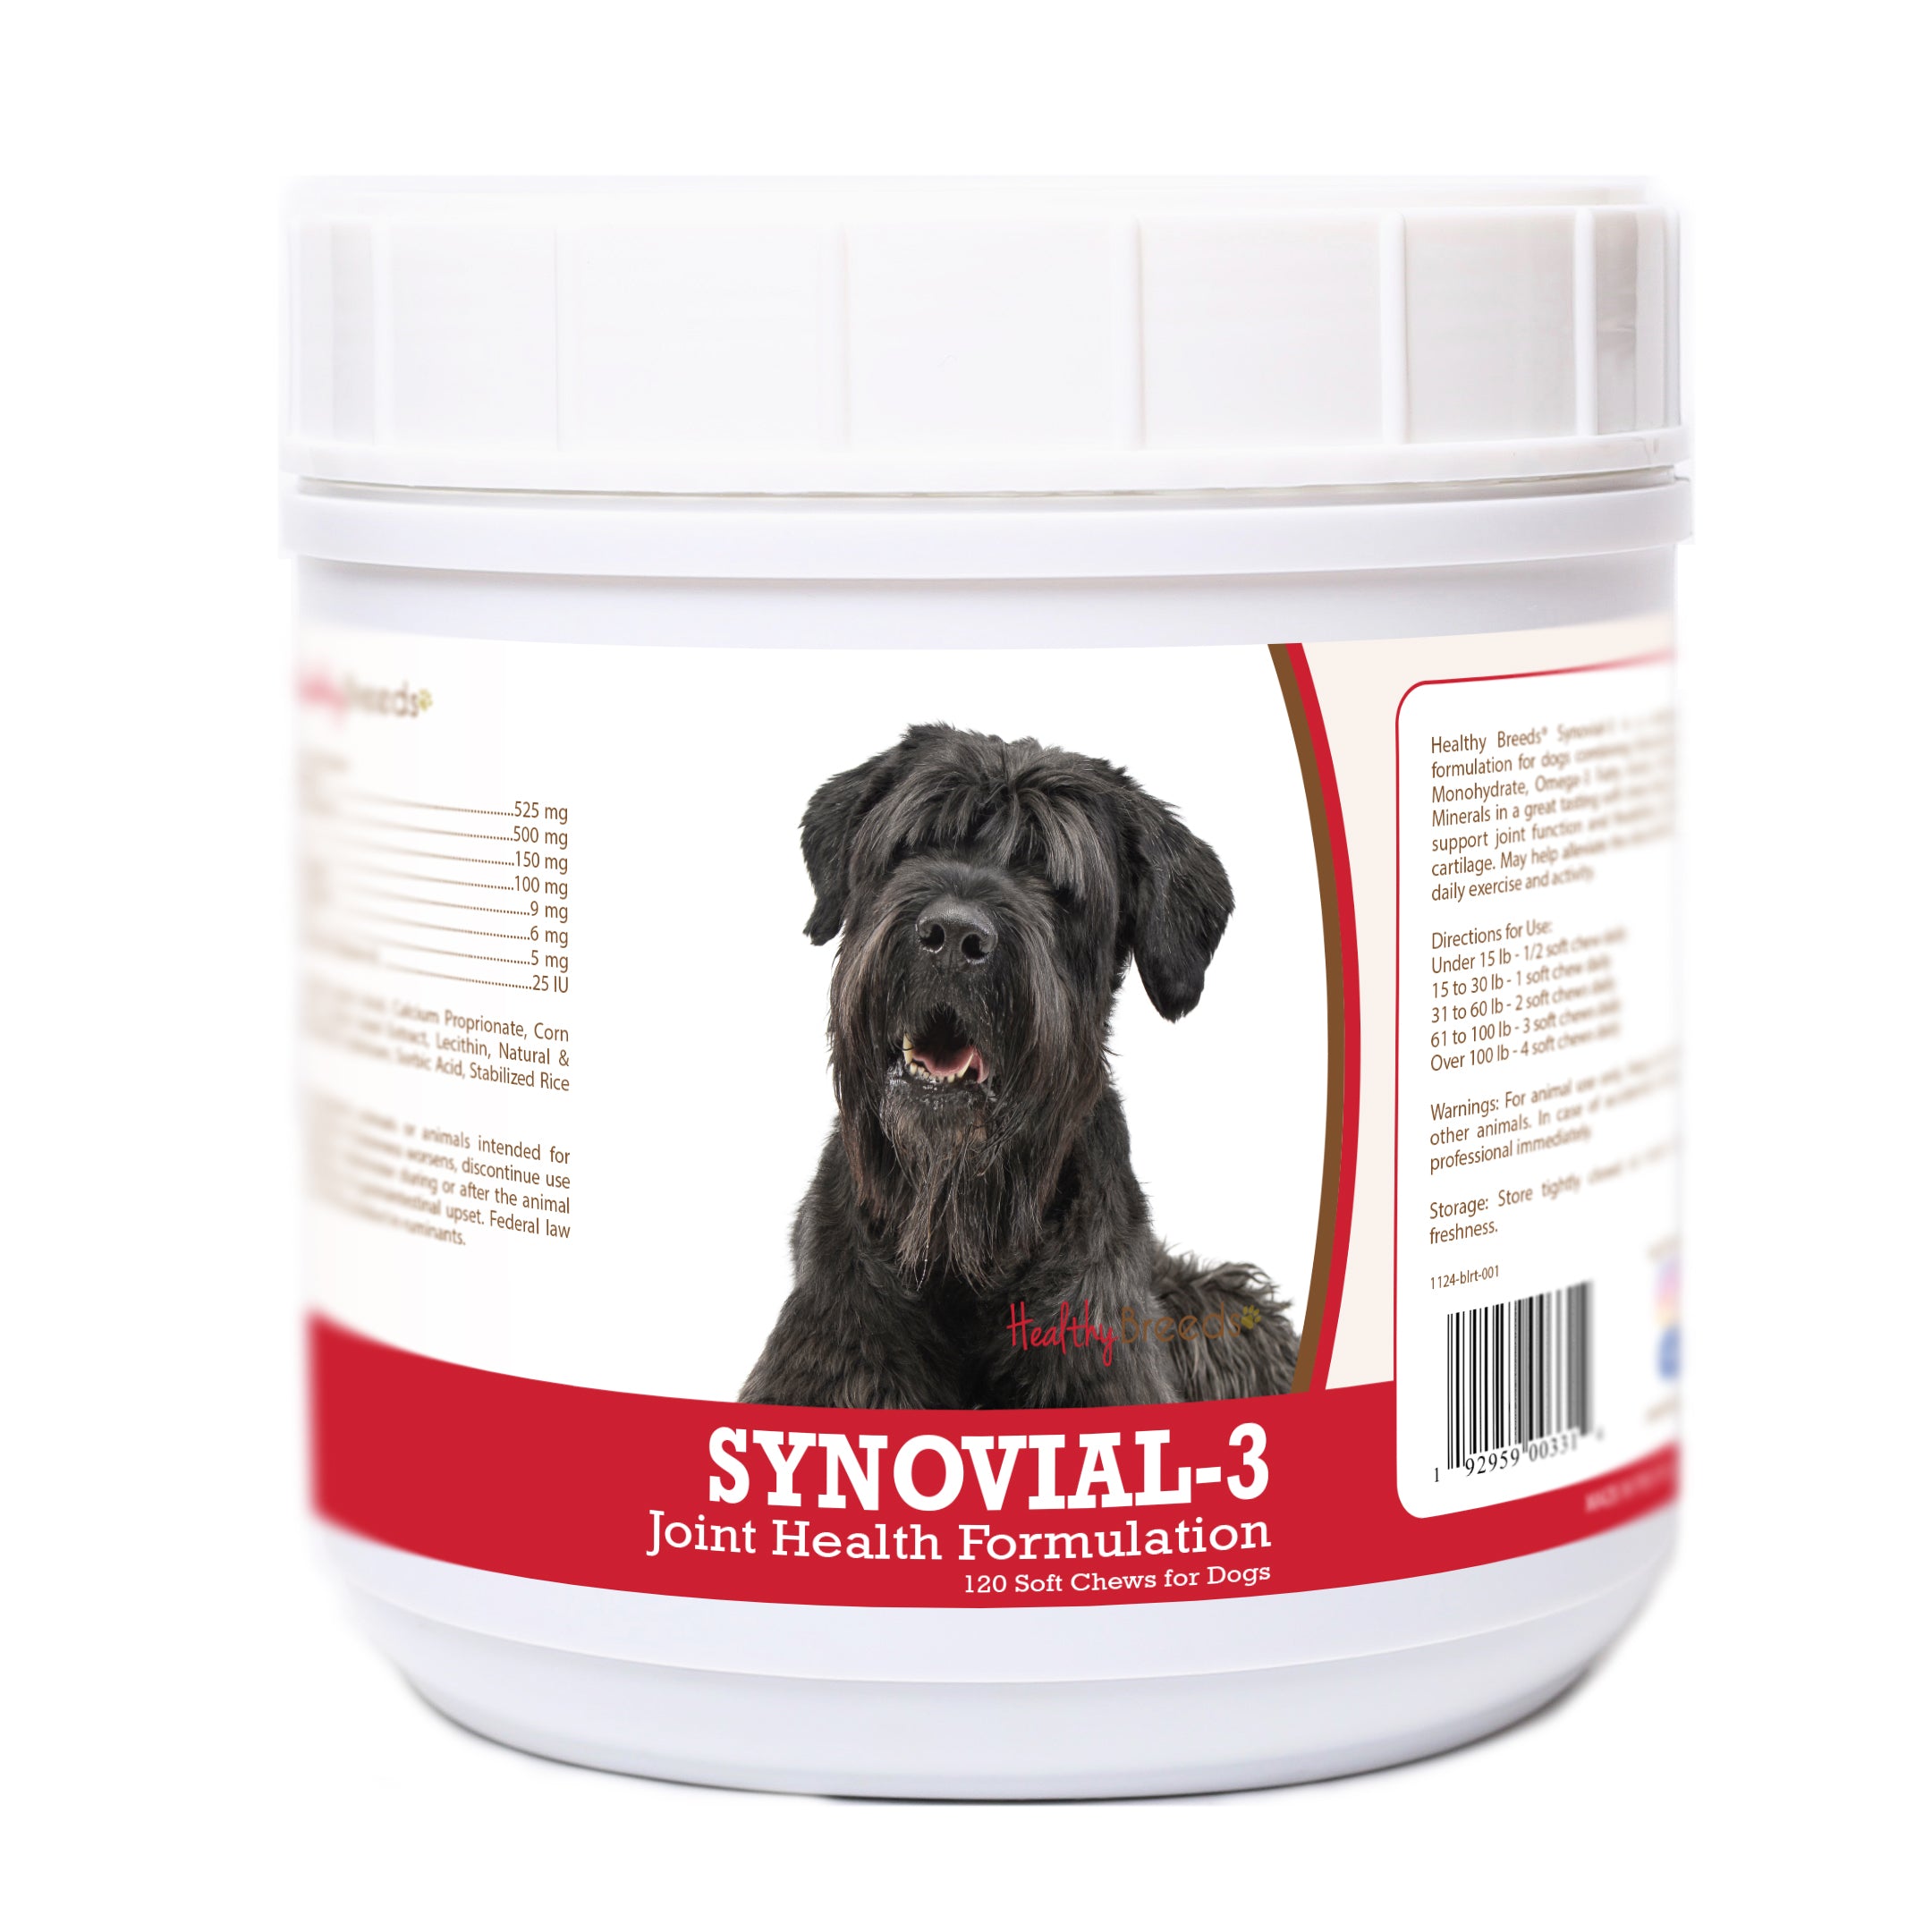 Black Russian Terrier Synovial-3 Joint Health Formulation Soft Chews 120 Count